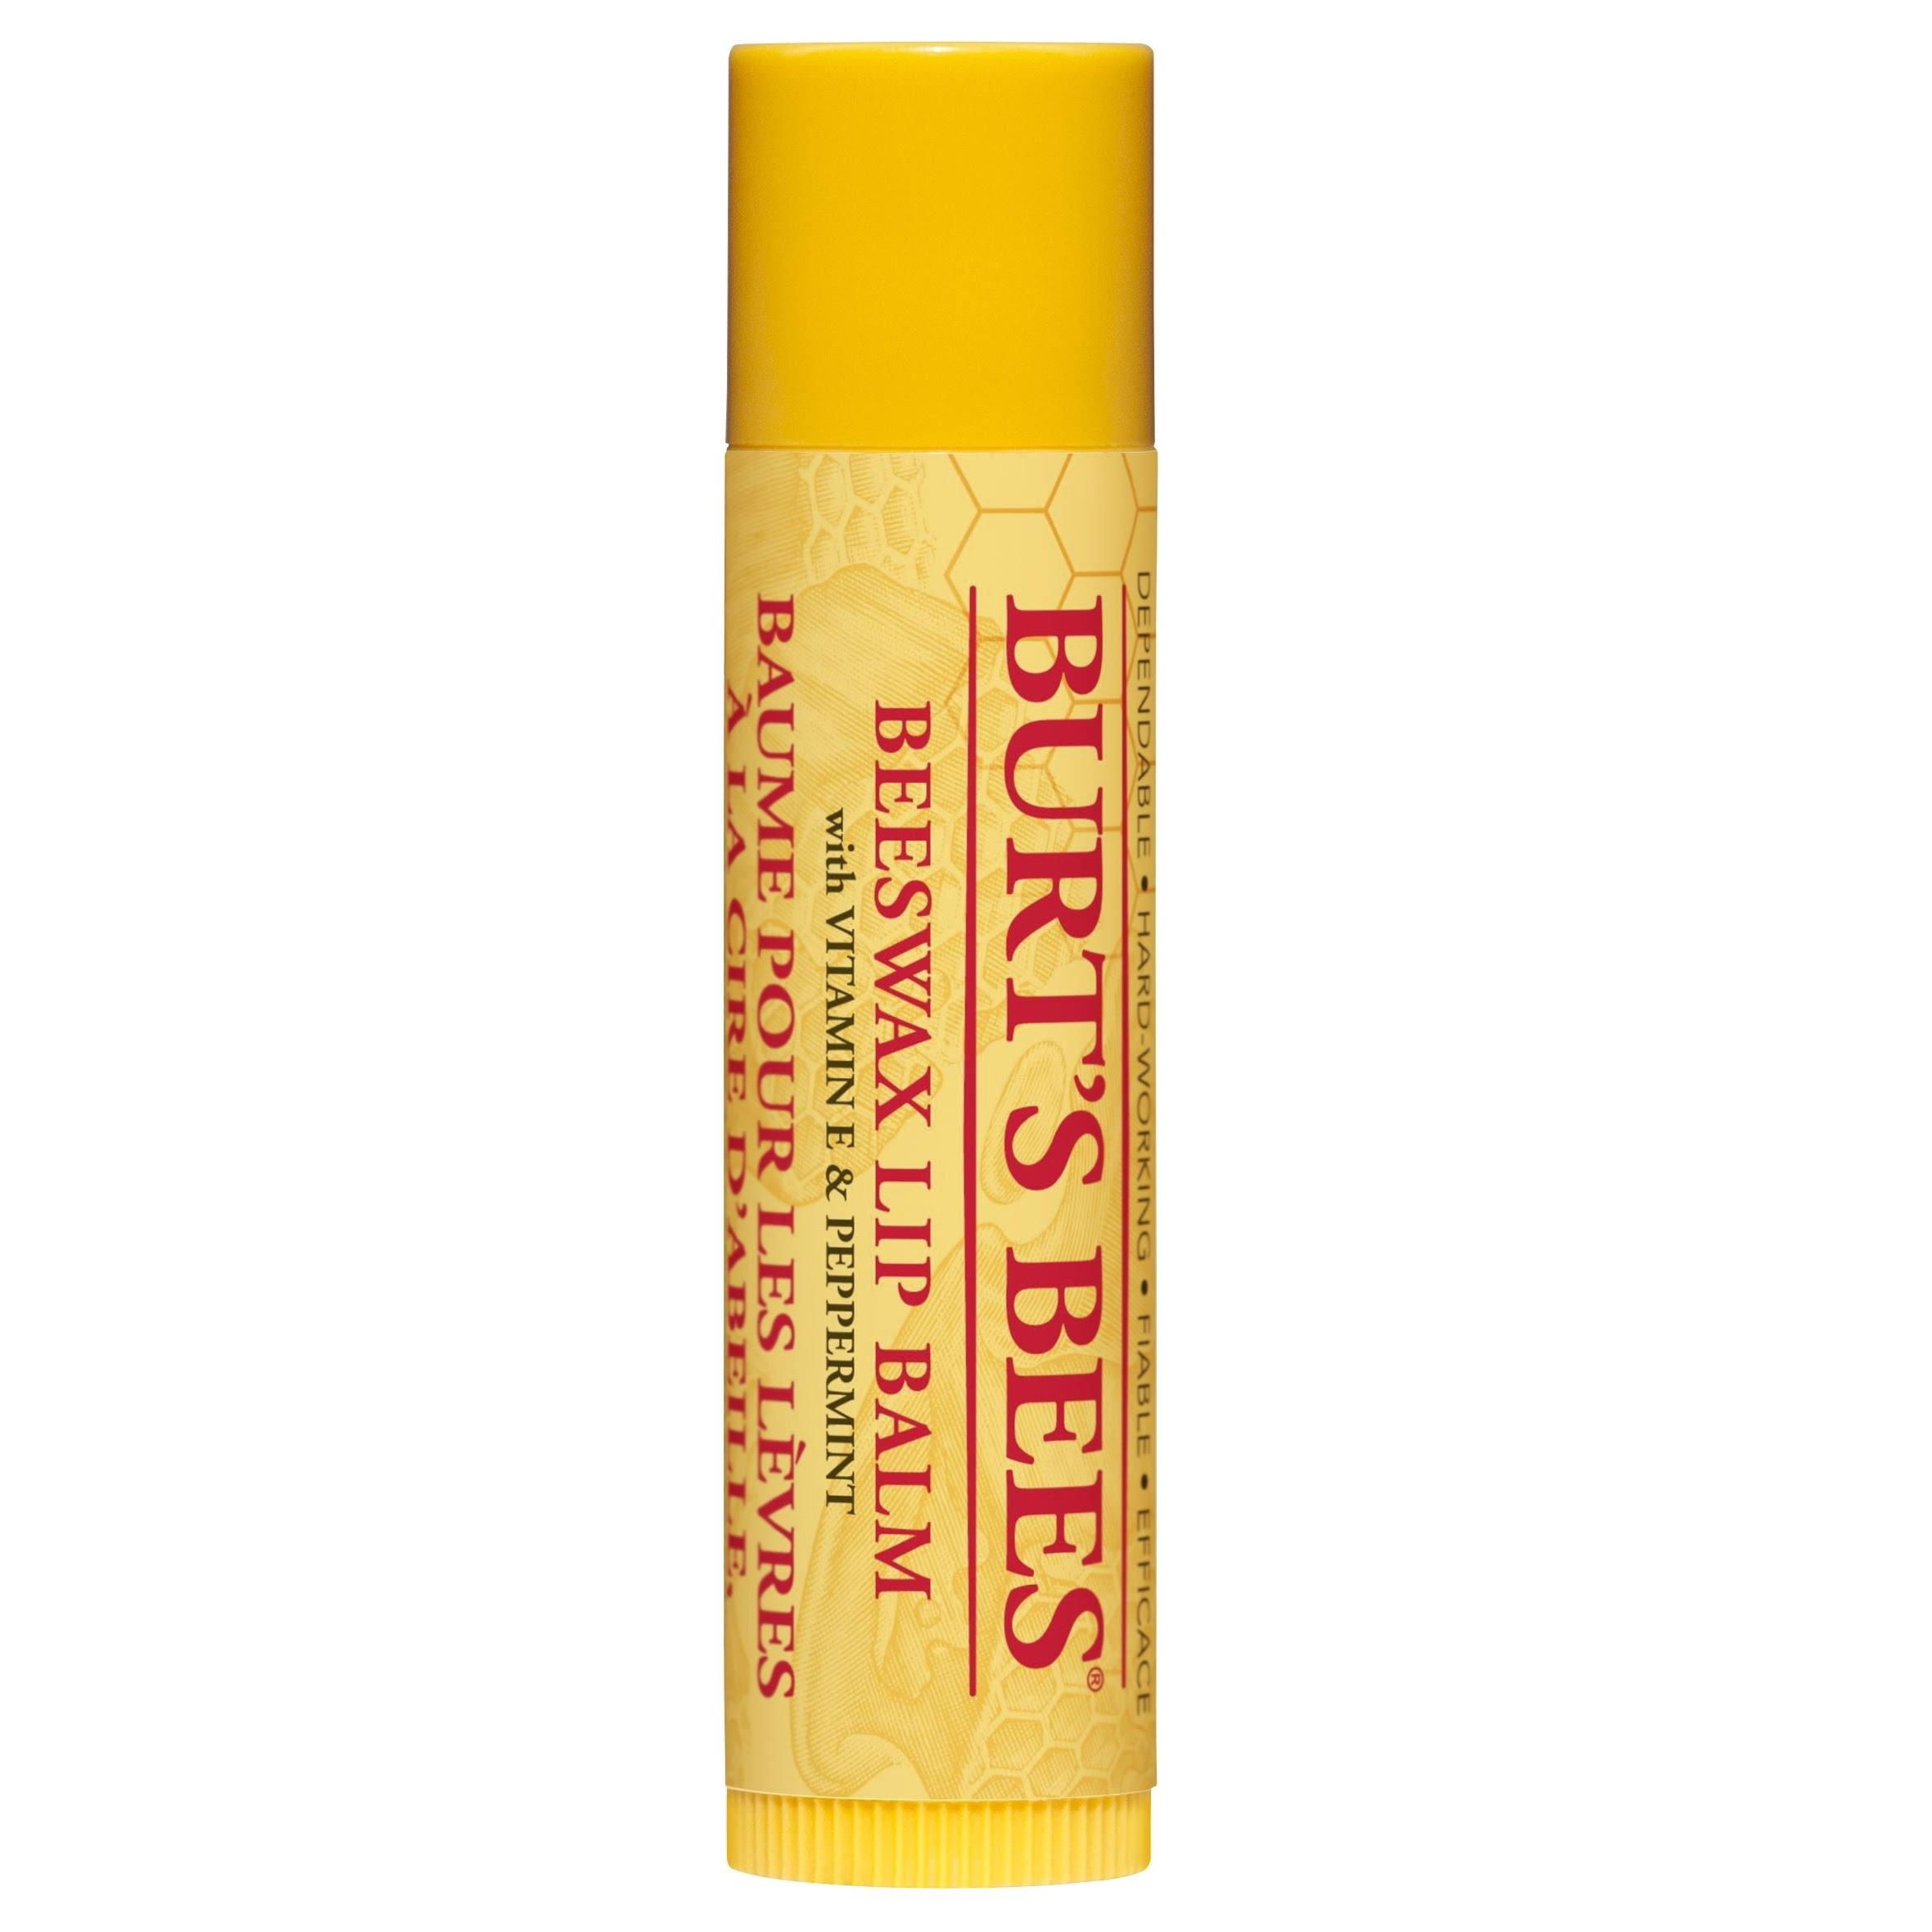 Burt's Bees Beeswax Lip Balm - with Vitamin E and Peppermint, 4.25g